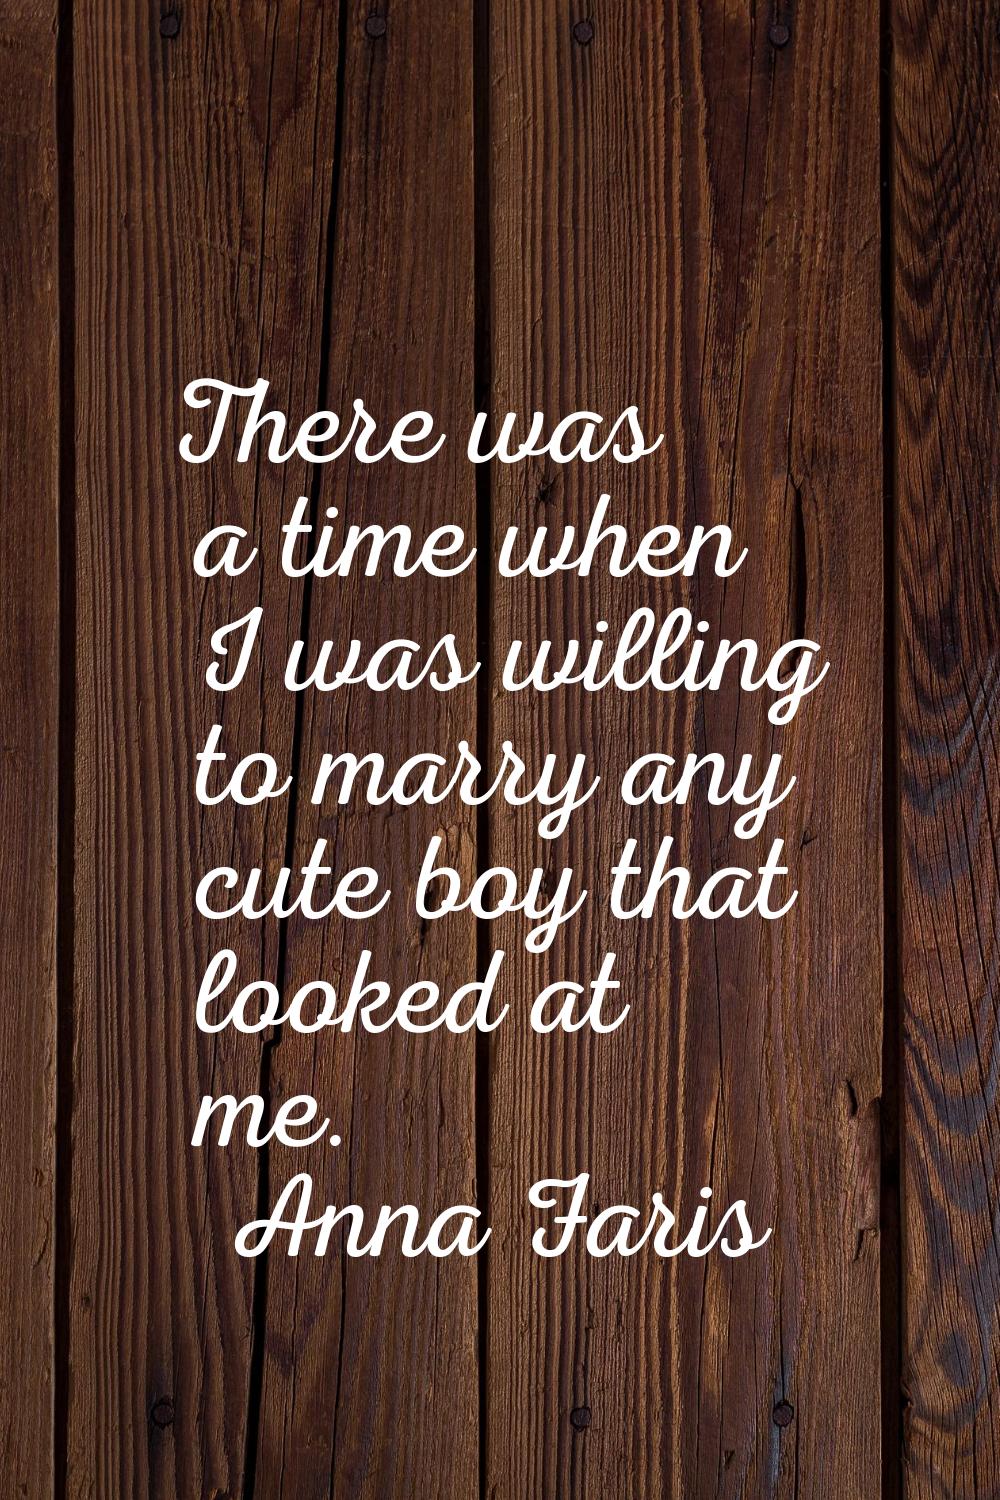 There was a time when I was willing to marry any cute boy that looked at me.